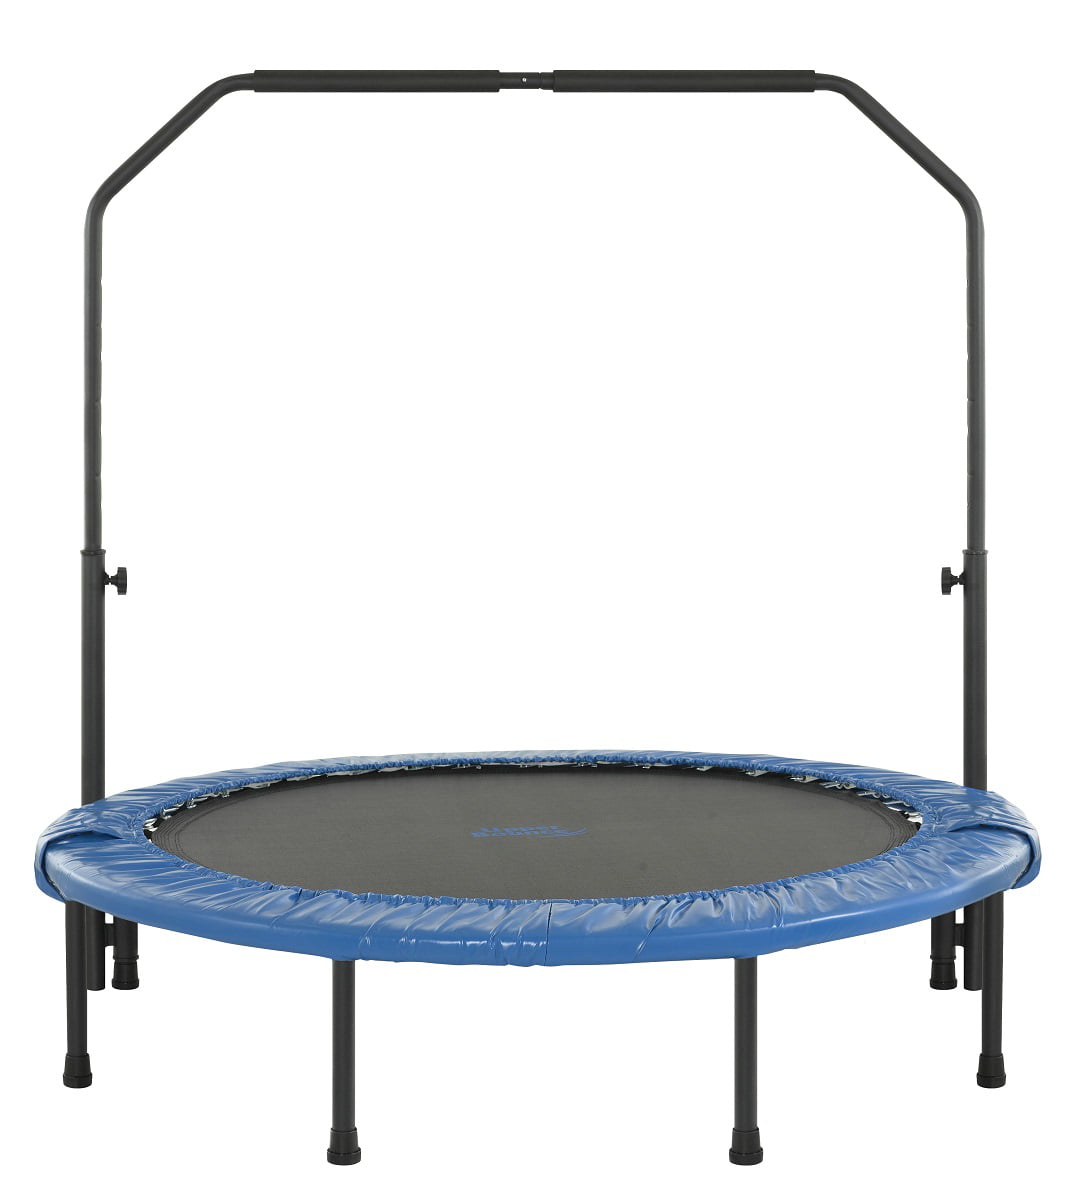 Gold's Gym 36 Inch Trampoline Circuit Trainer for sale online 